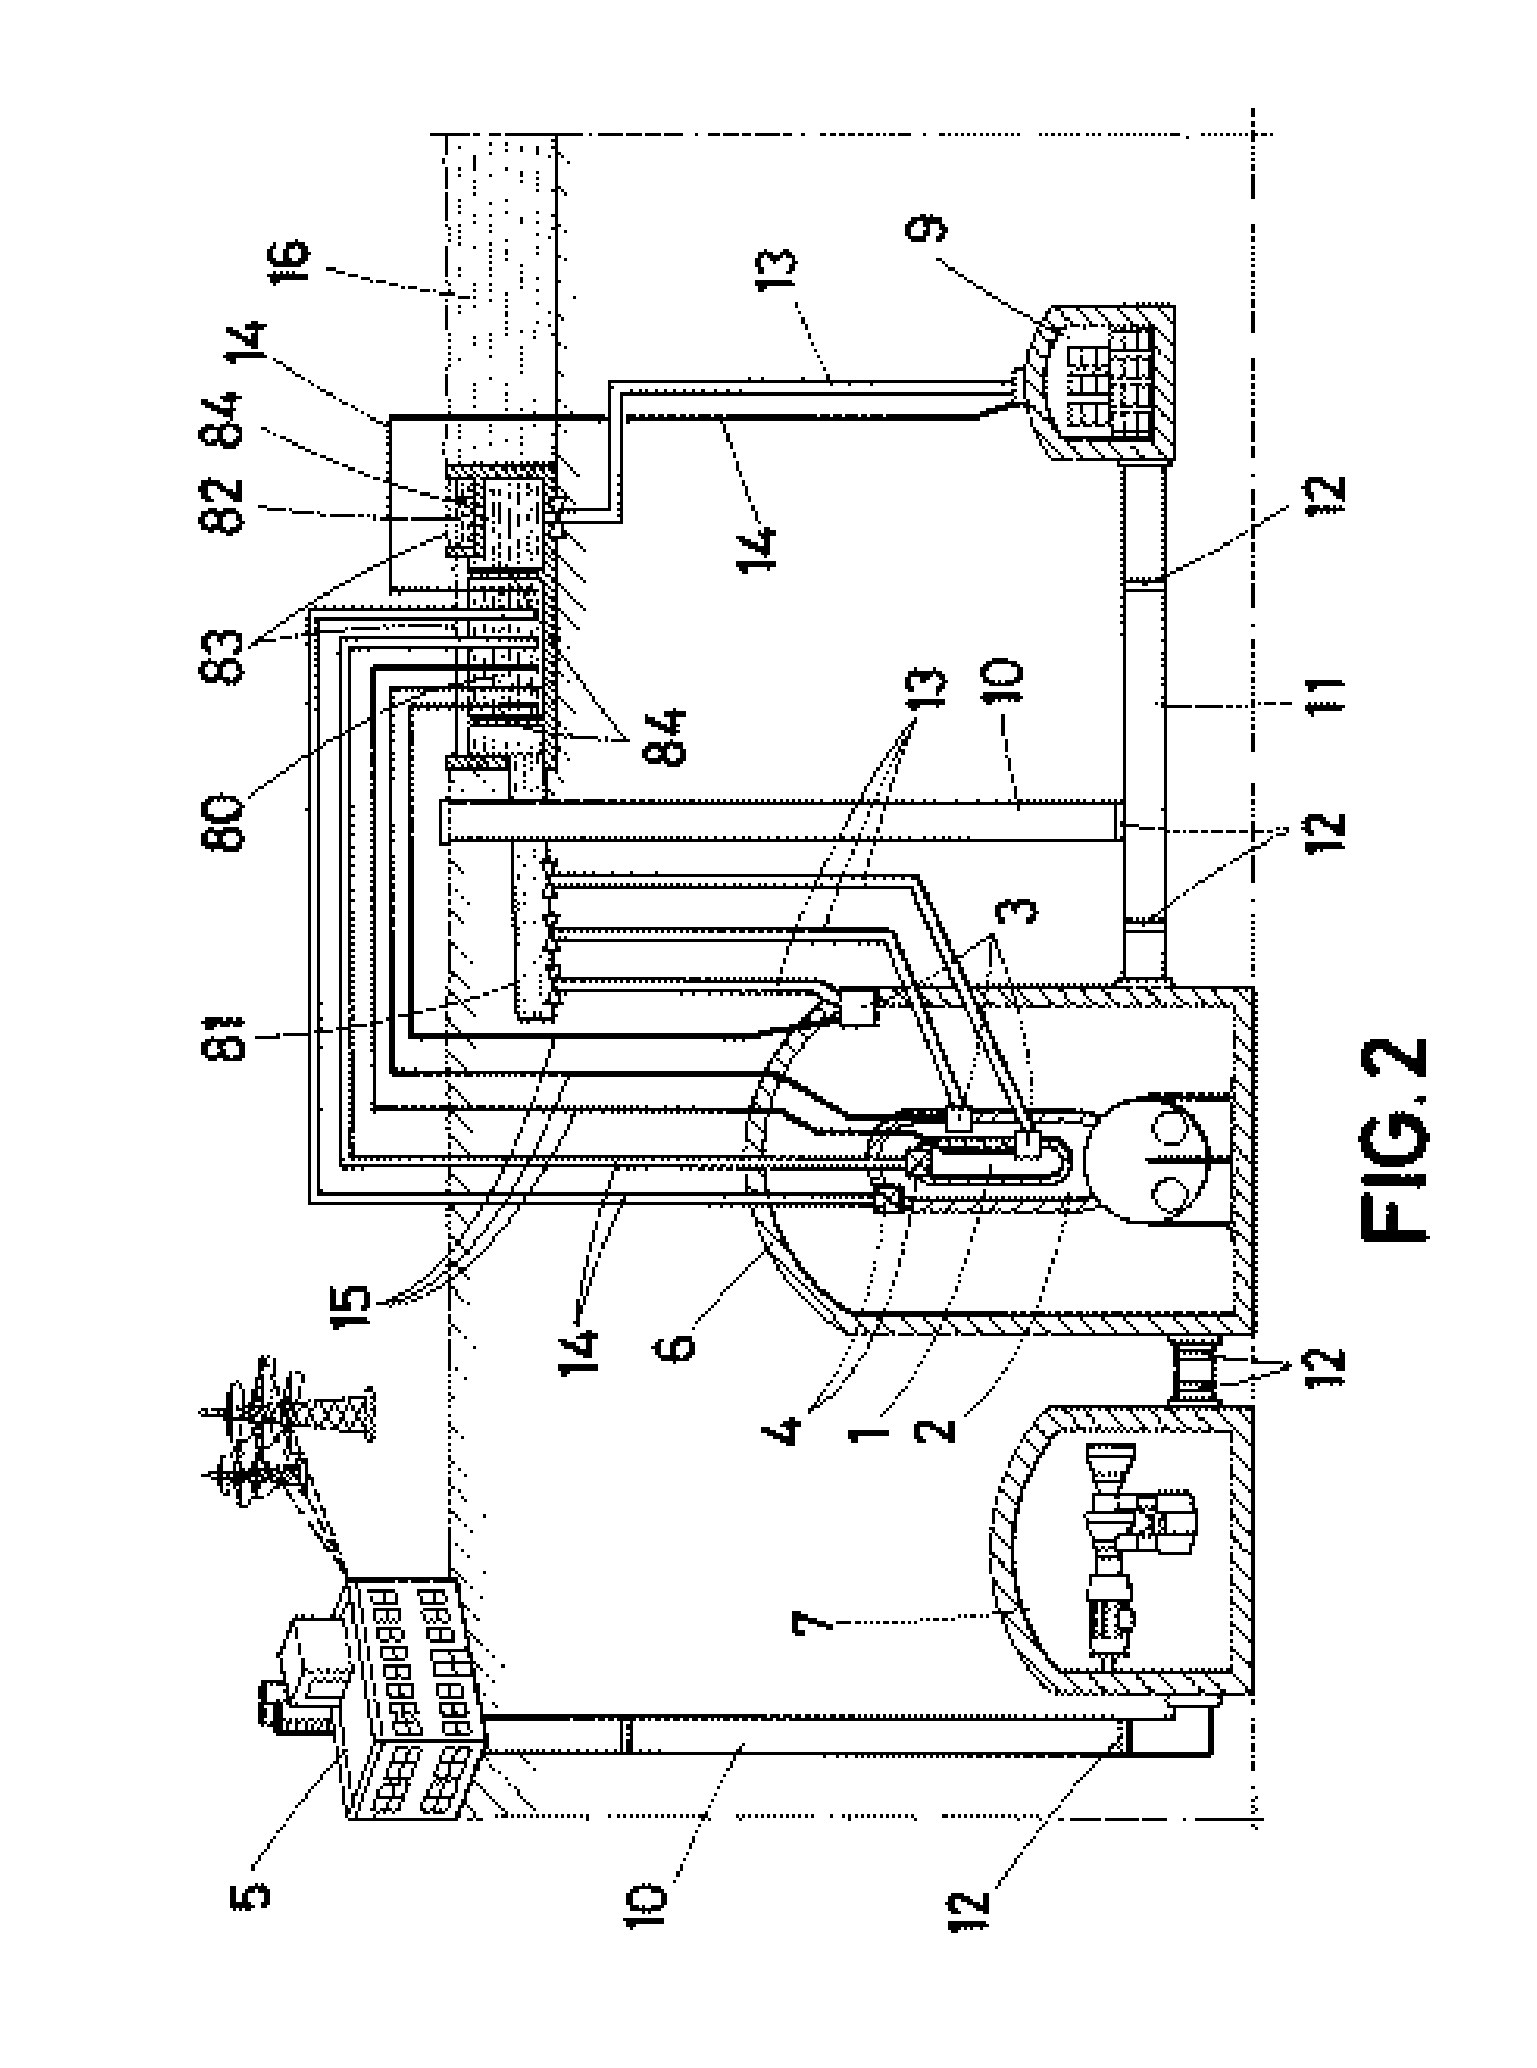 Nuclear power plant, safety system with fuse element and gravity elevator